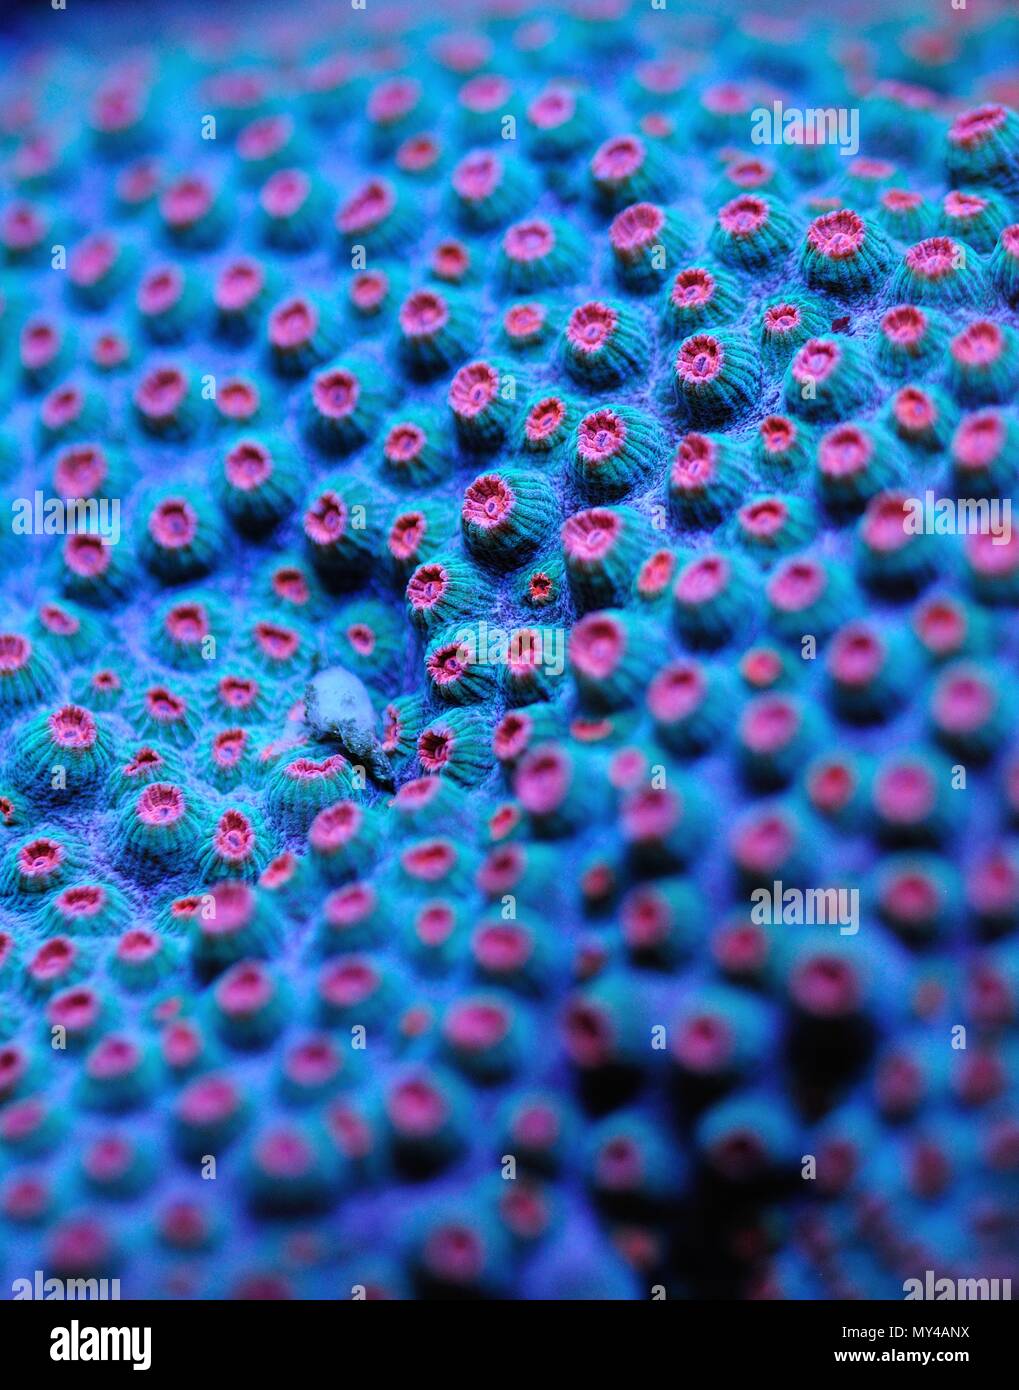 Blue and pink meteor shower coral closeup Stock Photo